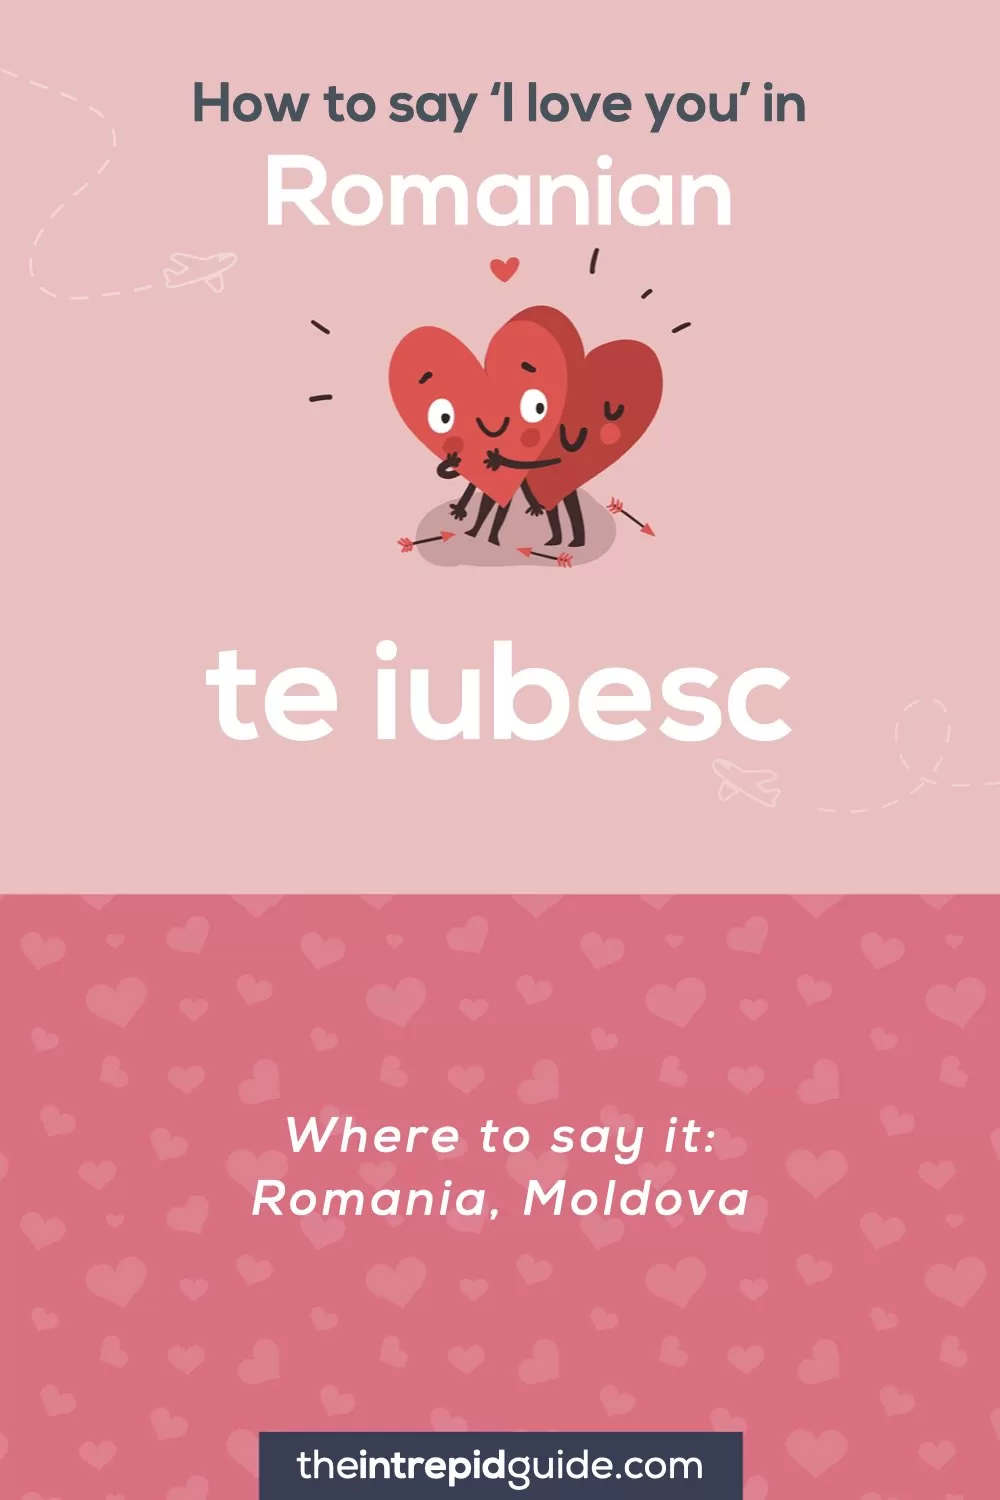 How to say I love you in different languages - Romanian - te iubesc